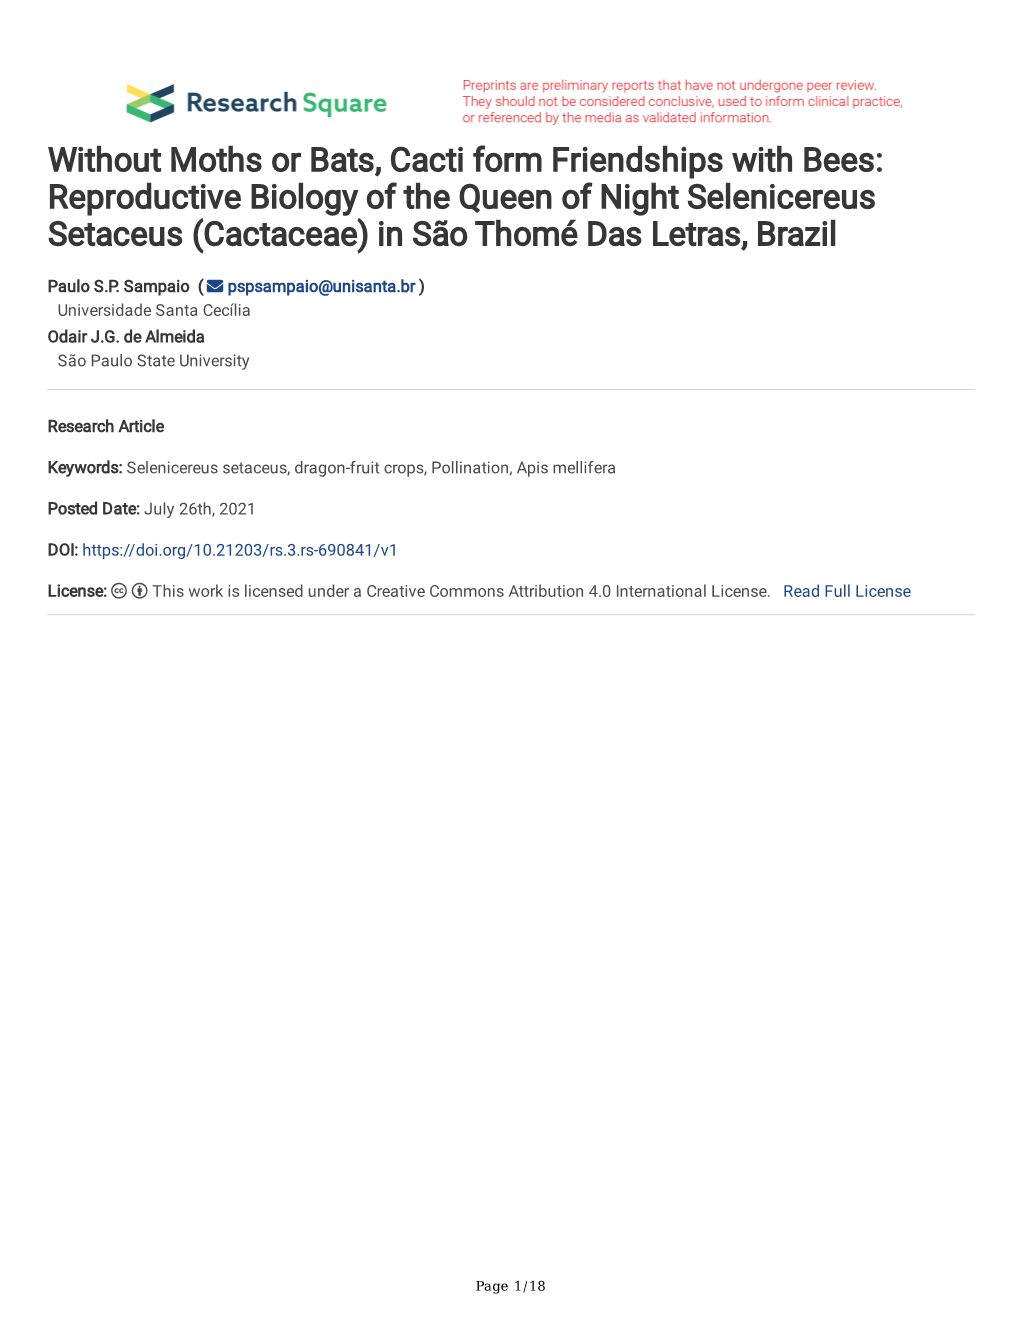 Without Moths Or Bats, Cacti Form Friendships with Bees: Reproductive Biology of the Queen of Night Selenicereus Setaceus (Cactaceae) in São Thomé Das Letras, Brazil